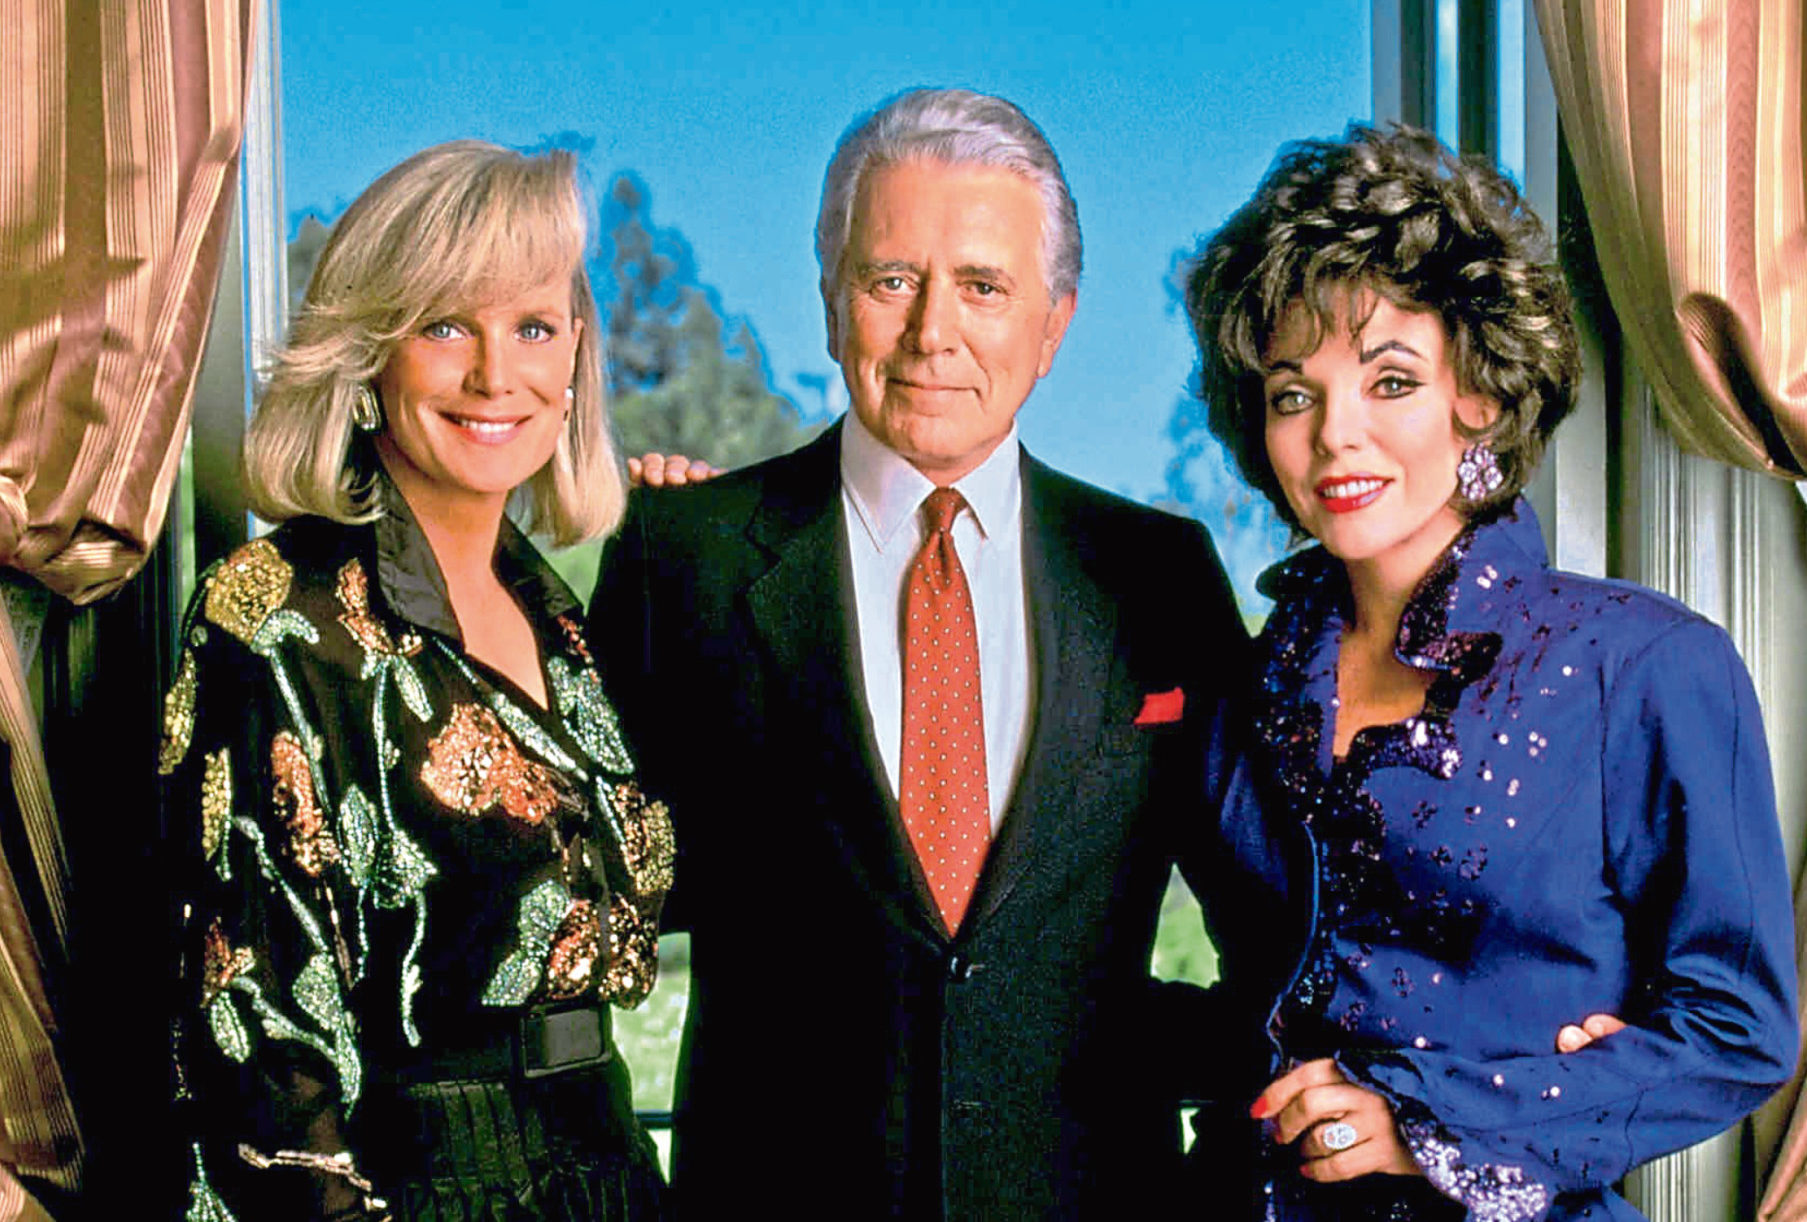 Us Soap Legend Linda Evans On How Ratings Hit Dynasty Changed Her.